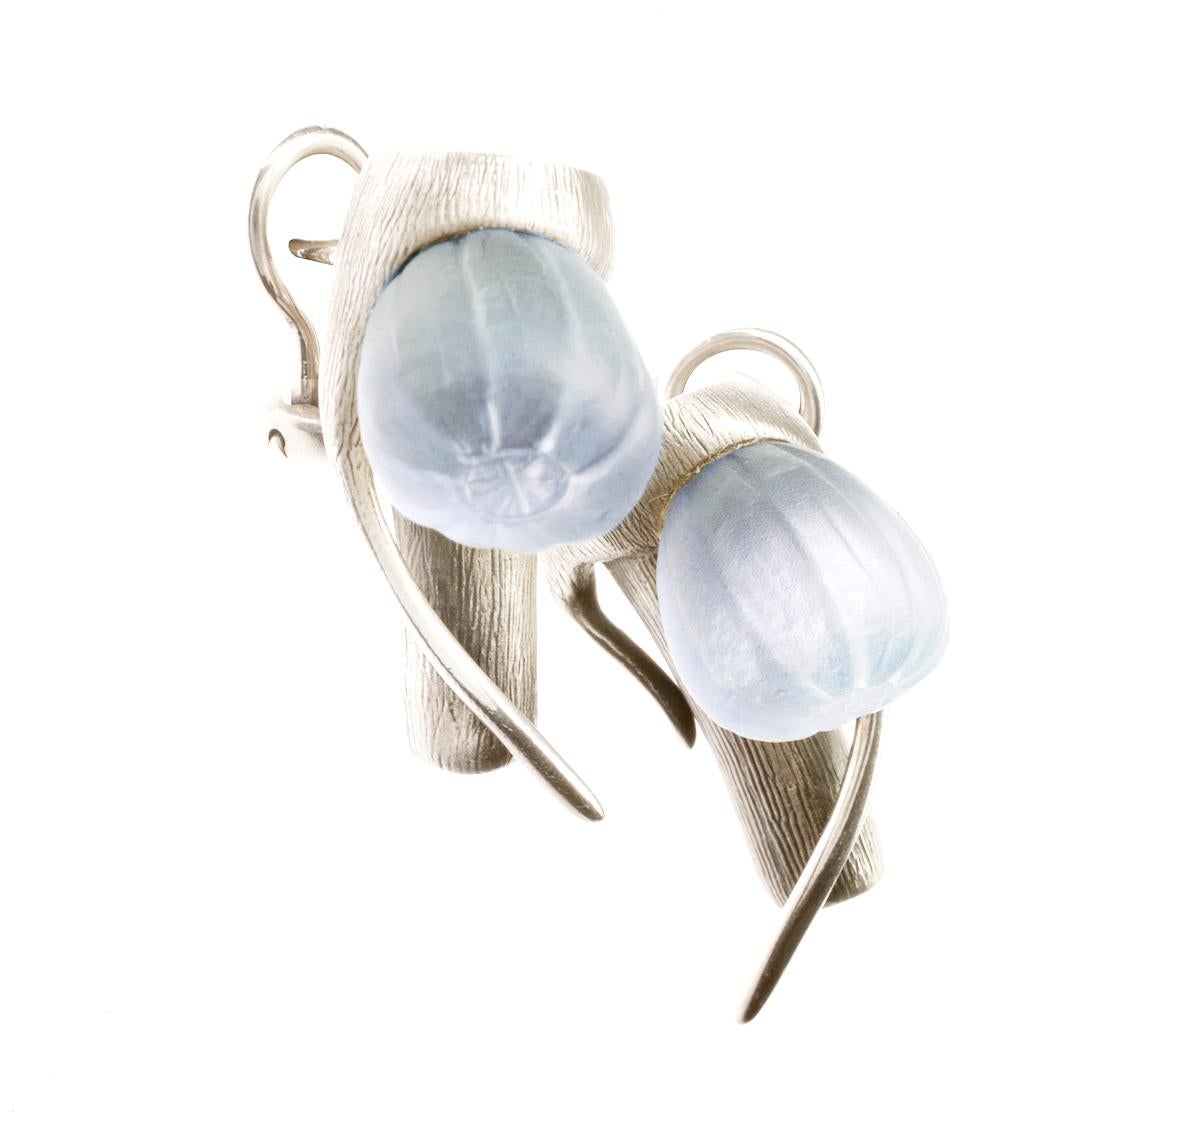 These fig earrings are three-dimensional, made of sterling silver and adorned with frosted blue quartzes. They complement sun-kissed skin and enhance the face with delicate color flashes. This designer jewelry piece is handcrafted and belongs to a